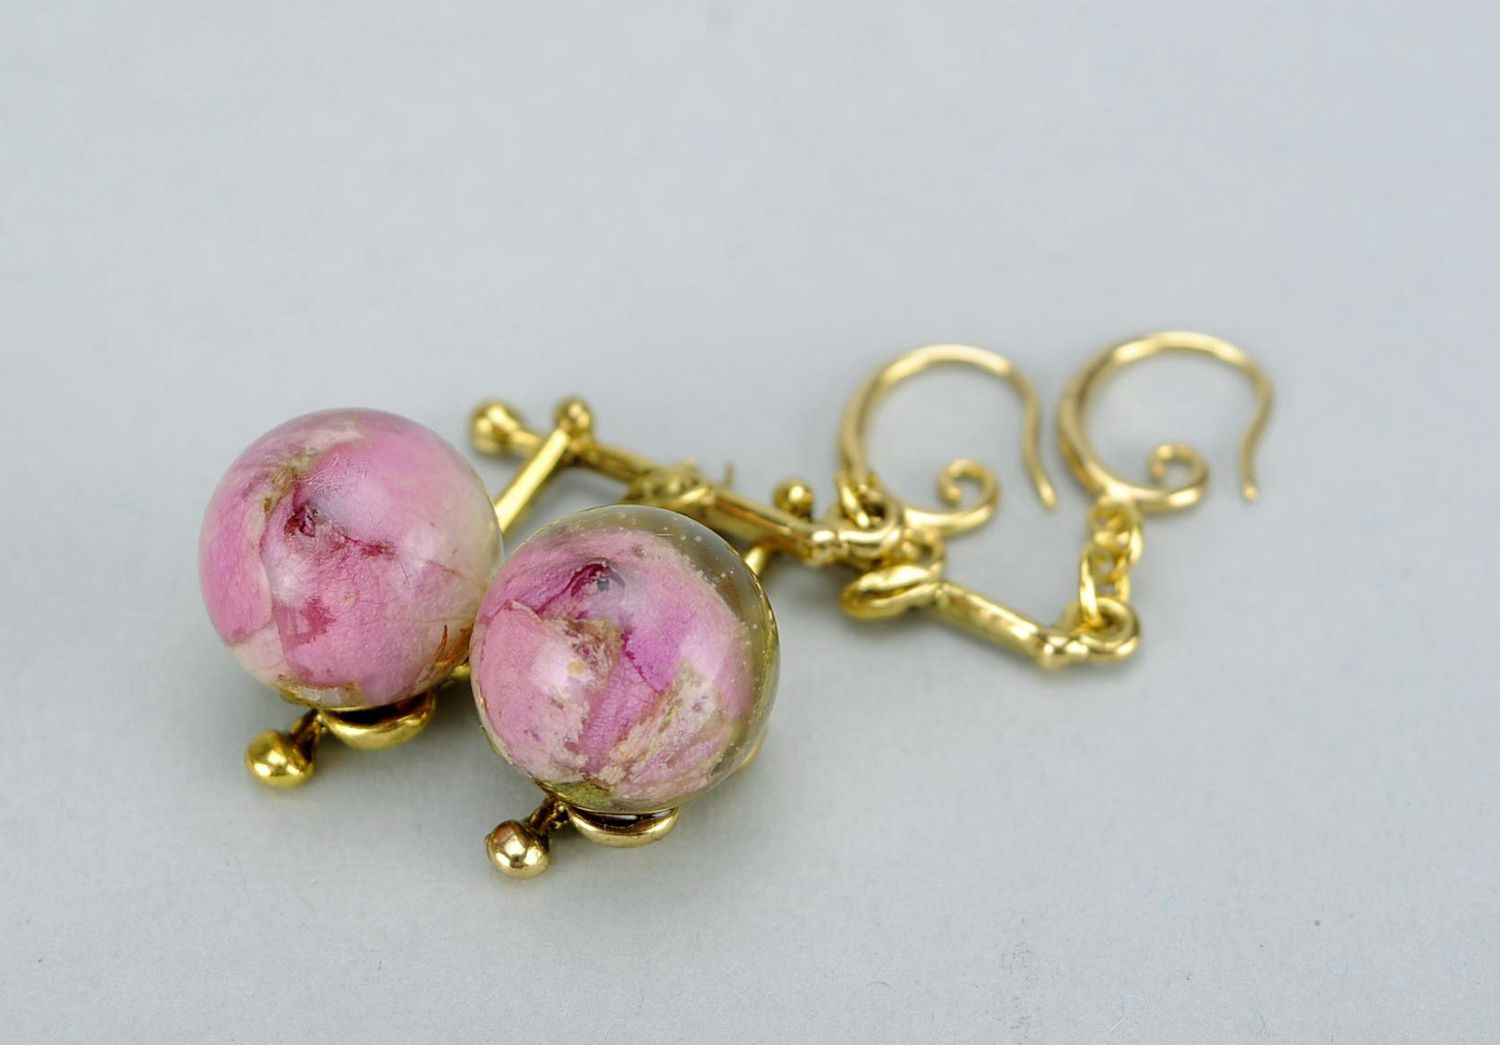 Golden earrings made from buds of the roses photo 4